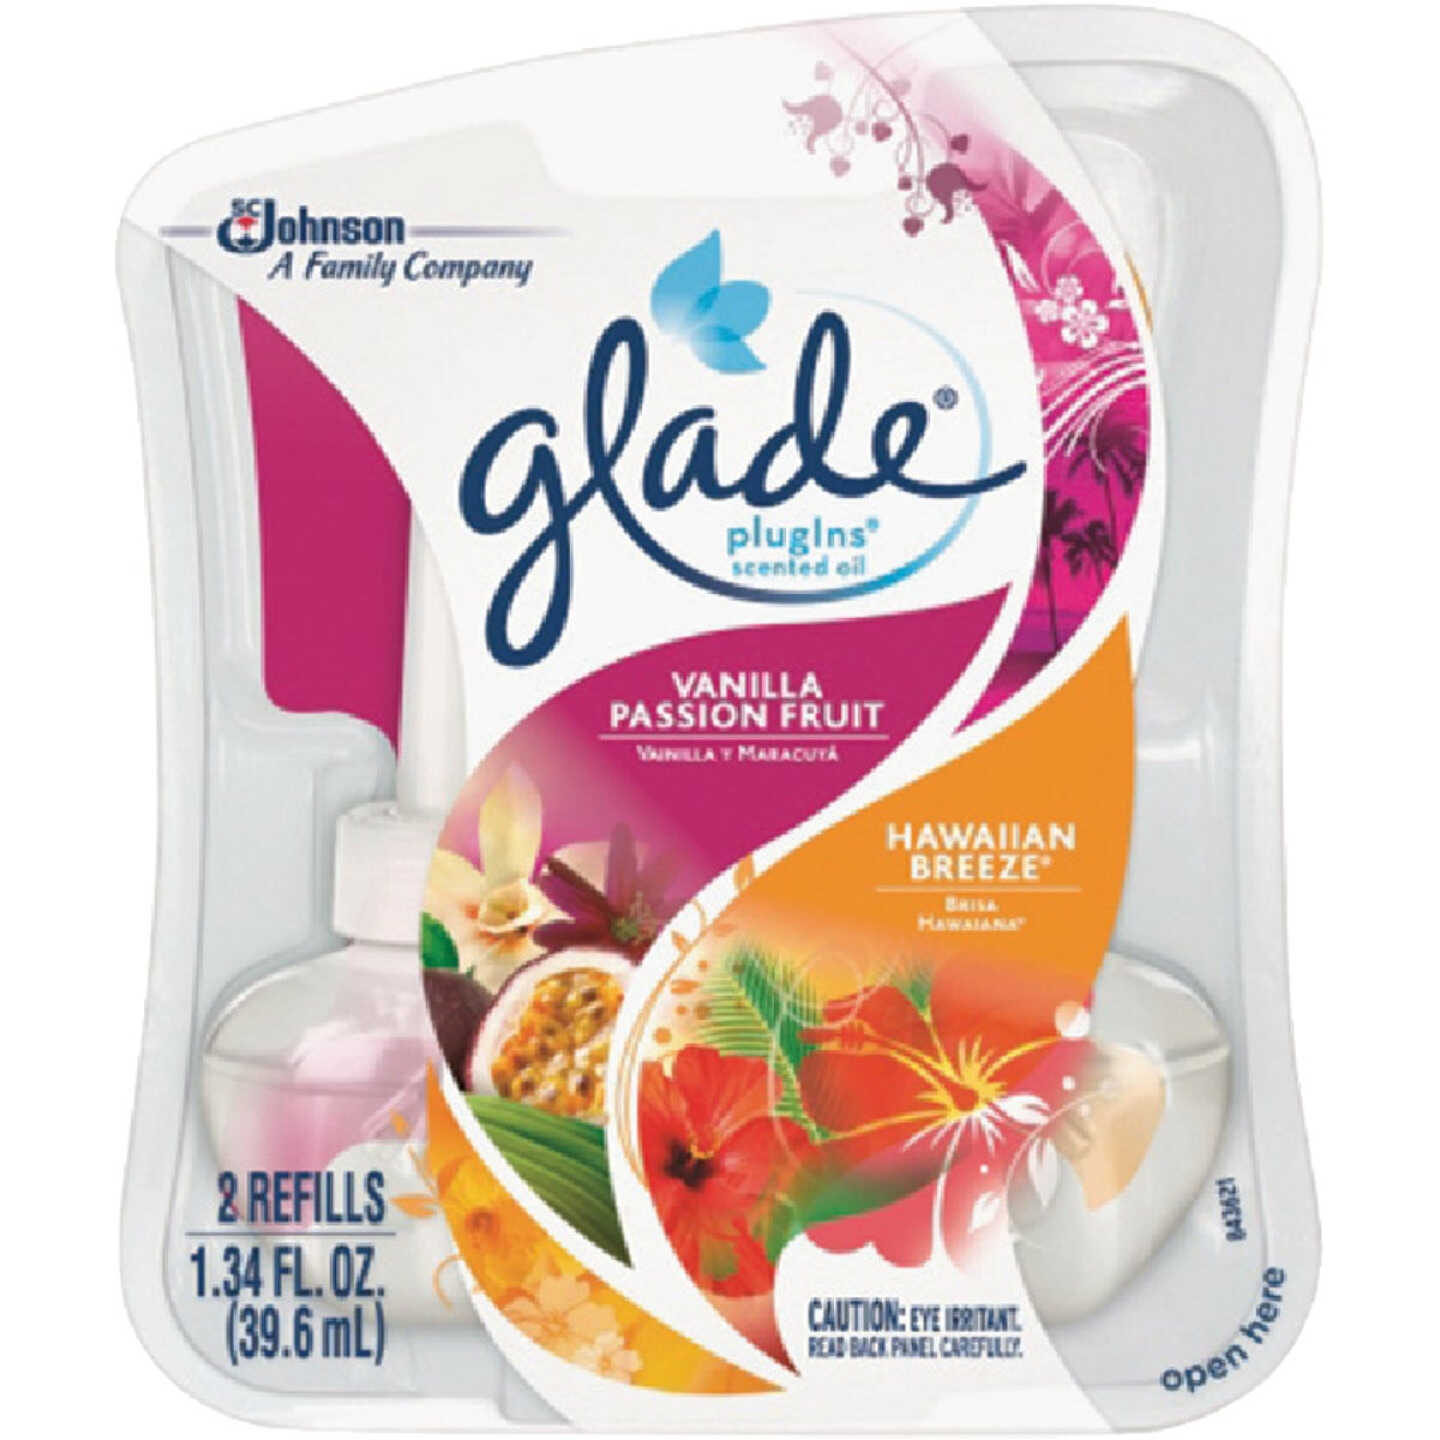 Glade PlugIns Passion Fruit/Hawaiian Breeze Scented Oil Air